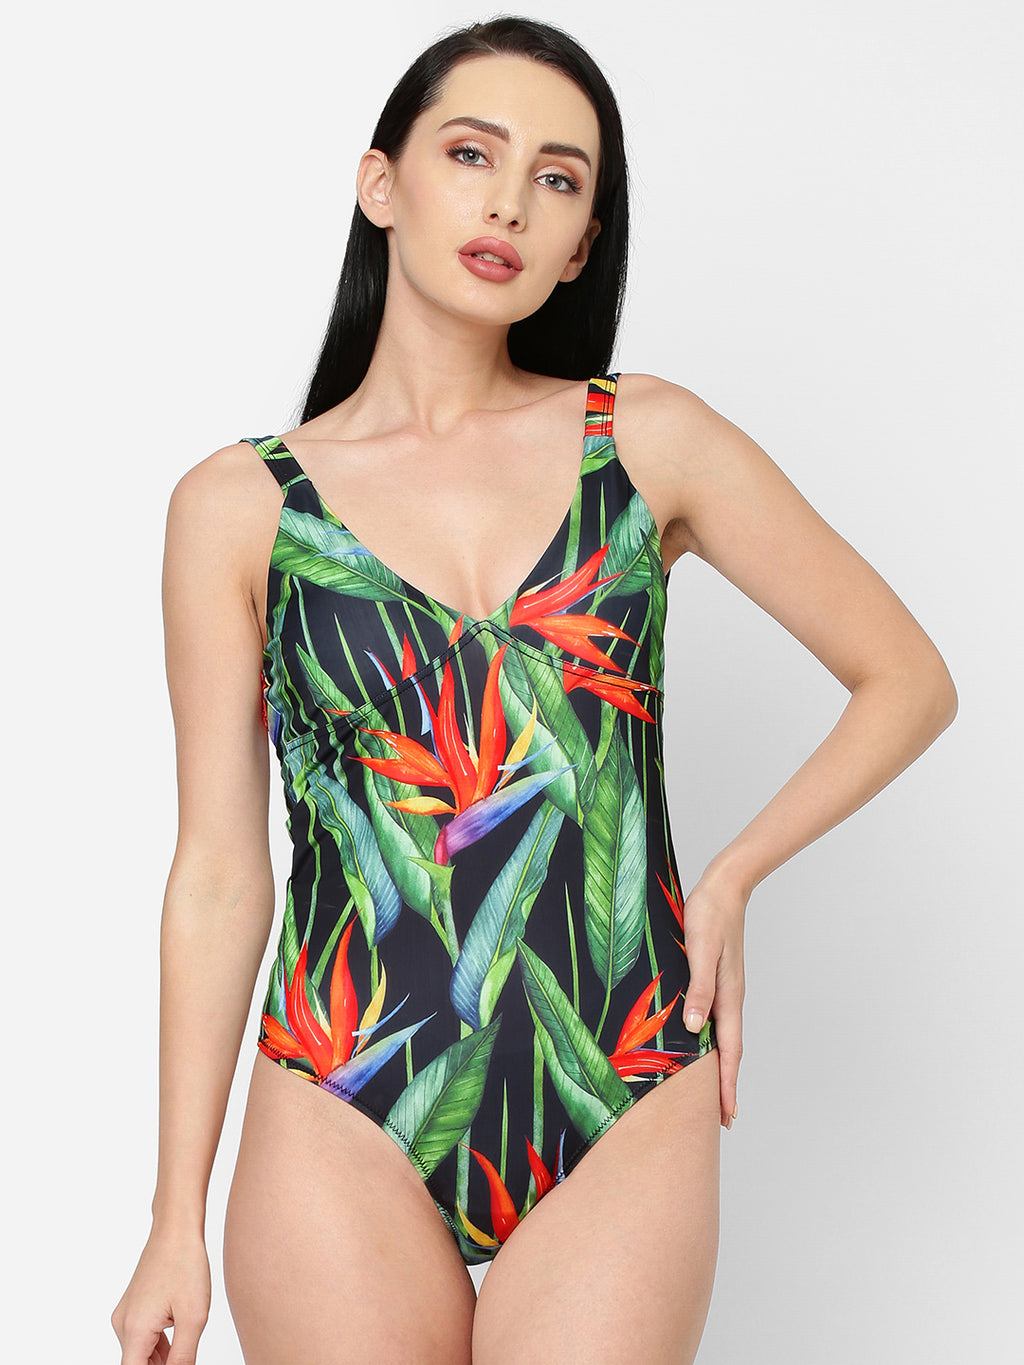 esha lal swimwear - online one piece -printed swimsuits at cheap prices online india - Hand painted swimsuit - Paradise swimsuit - removable cups - one piece adjustable straps - Pool ready swimsuits - slimming swimwear 